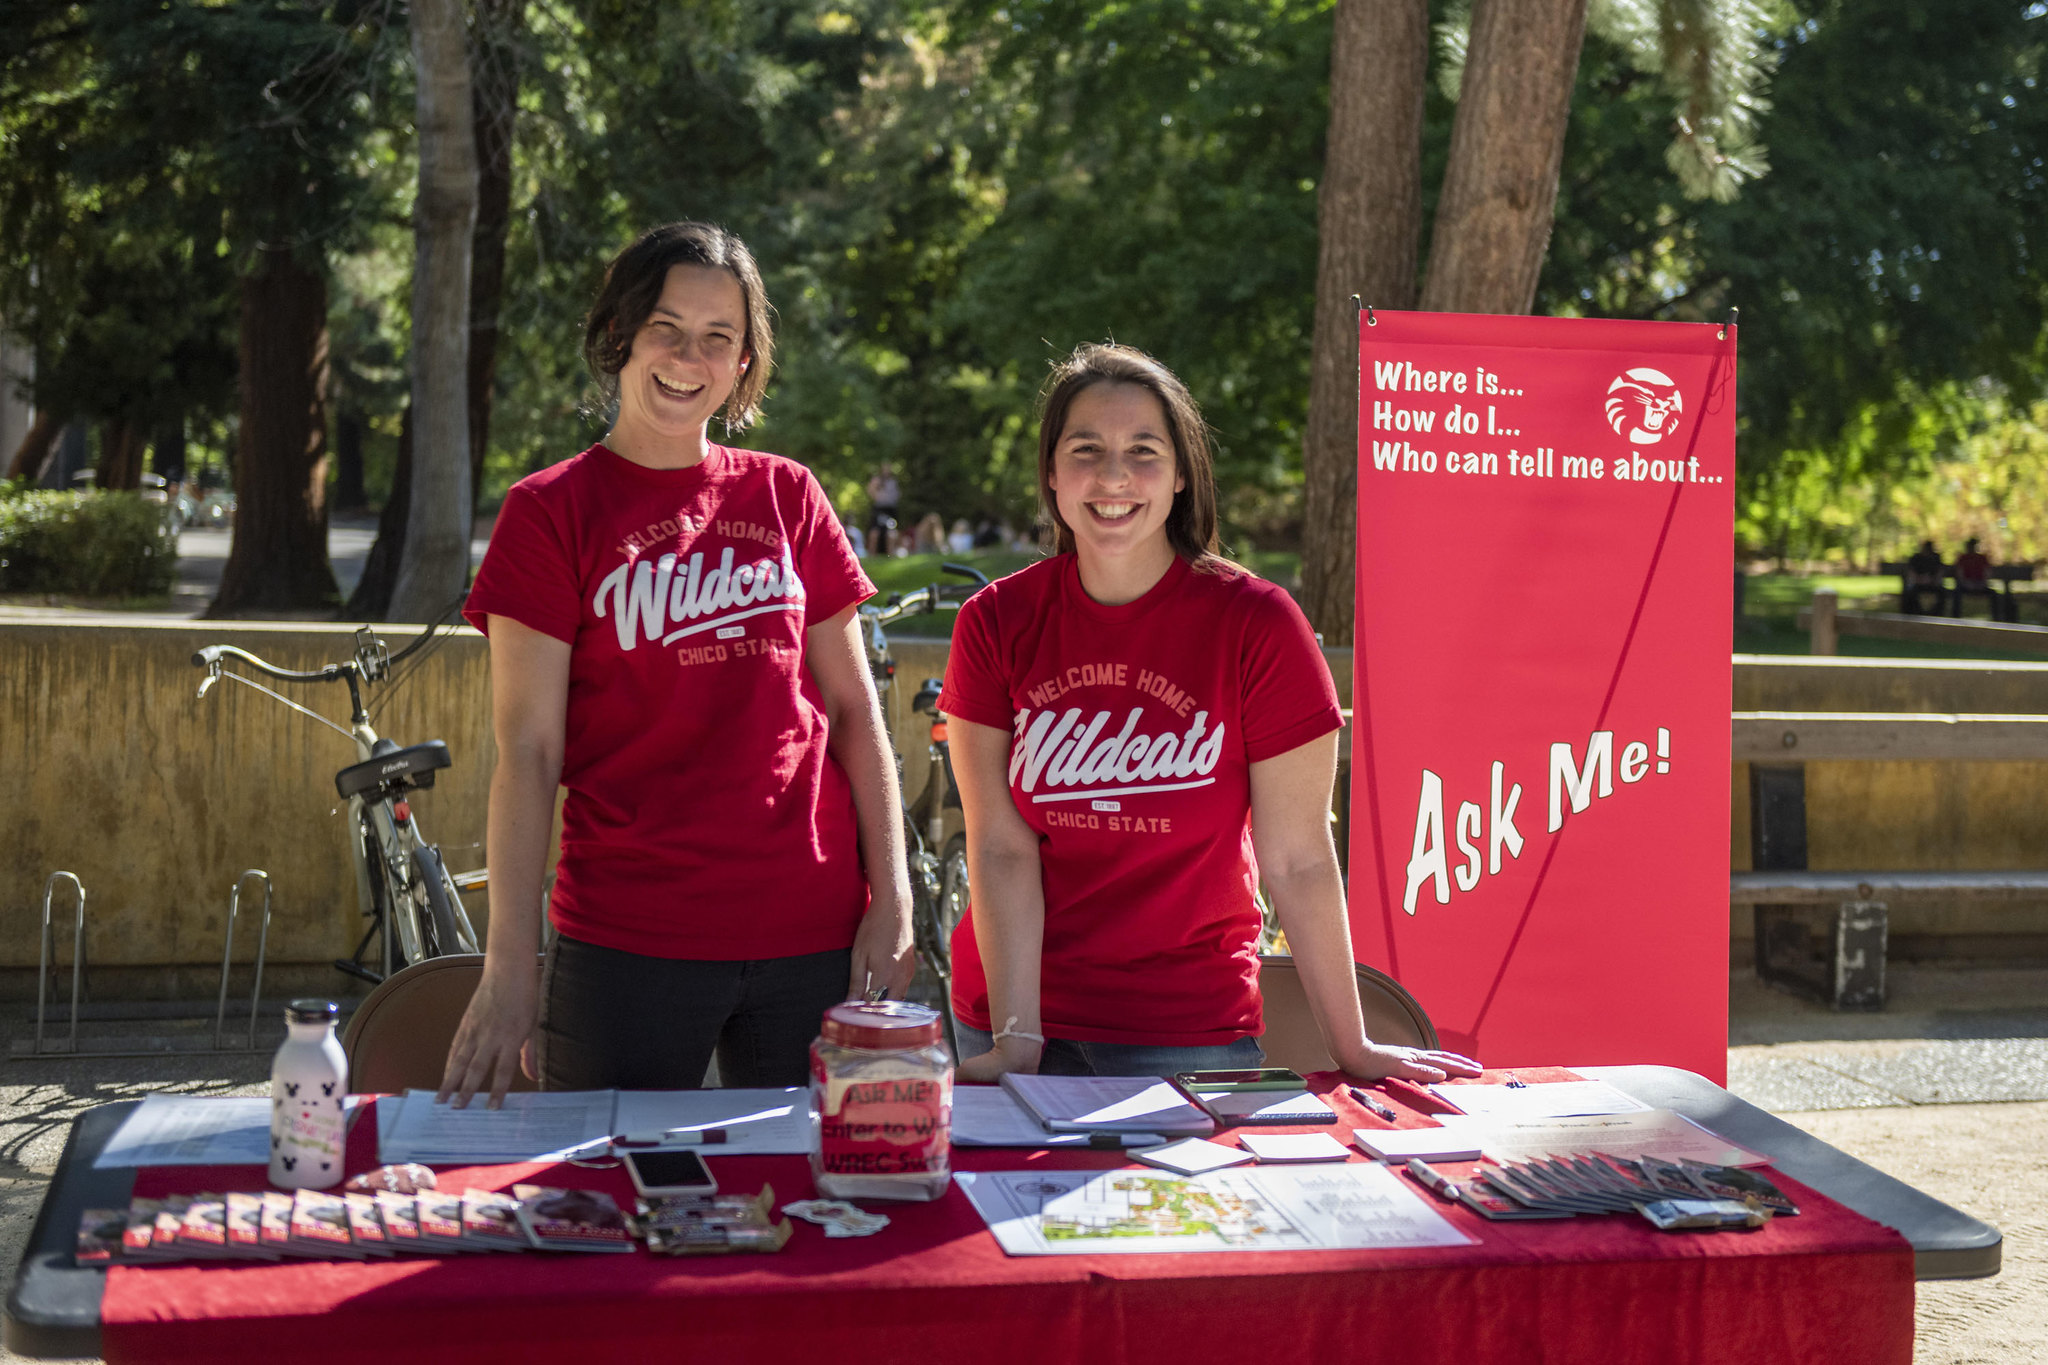 Two people stand behind an "Ask Me" table, smiling